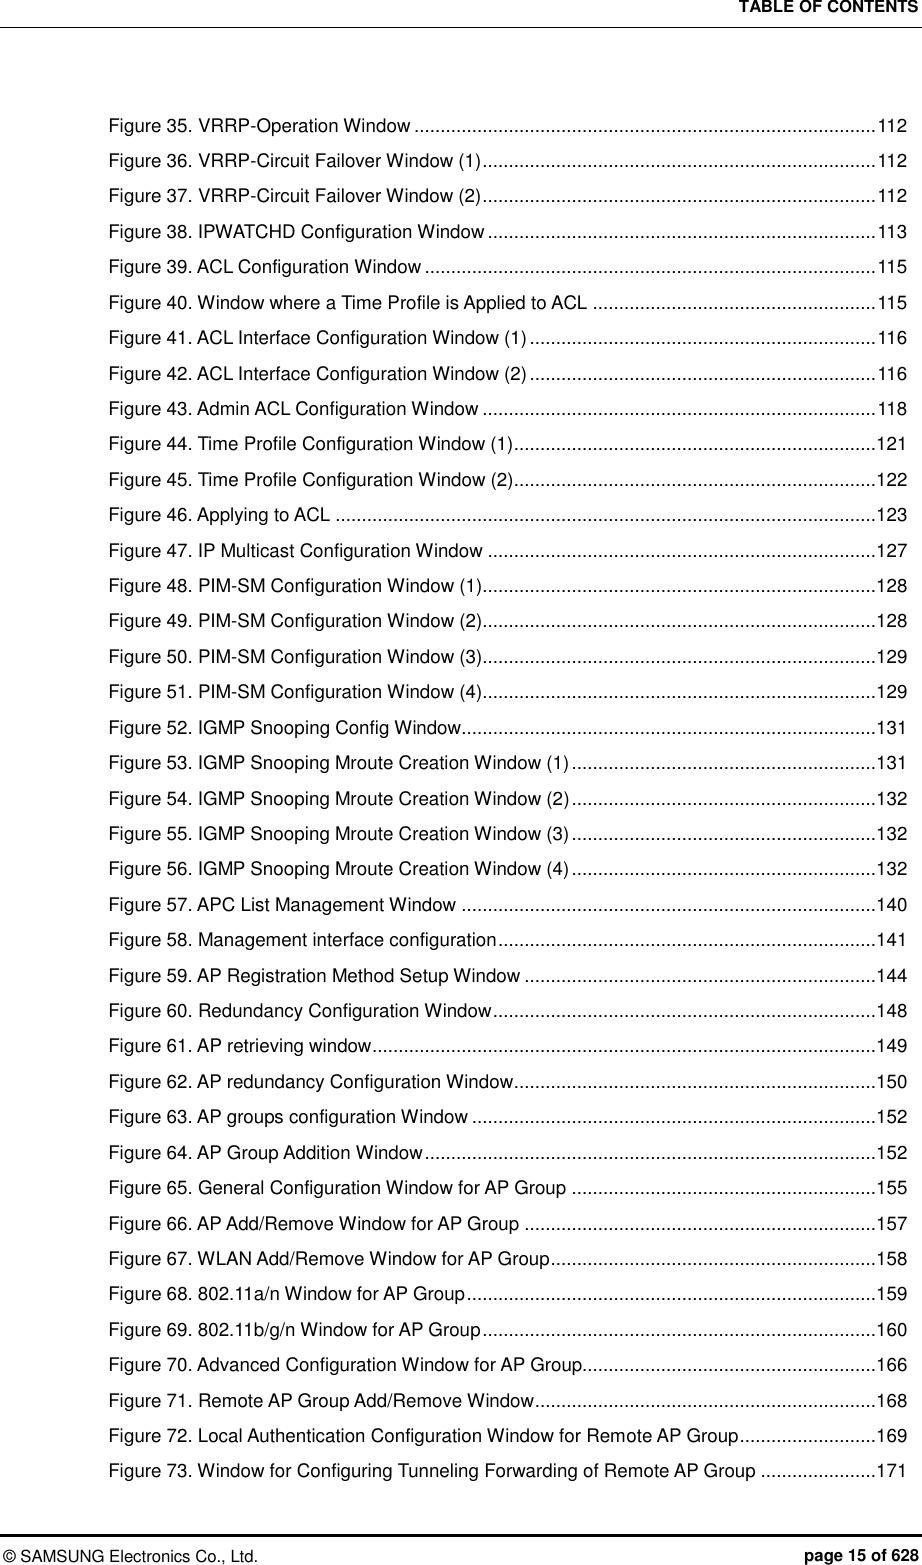 TABLE OF CONTENTS ©  SAMSUNG Electronics Co., Ltd.  page 15 of 628 Figure 35. VRRP-Operation Window ........................................................................................ 112 Figure 36. VRRP-Circuit Failover Window (1) ........................................................................... 112 Figure 37. VRRP-Circuit Failover Window (2) ........................................................................... 112 Figure 38. IPWATCHD Configuration Window .......................................................................... 113 Figure 39. ACL Configuration Window ...................................................................................... 115 Figure 40. Window where a Time Profile is Applied to ACL ...................................................... 115 Figure 41. ACL Interface Configuration Window (1) .................................................................. 116 Figure 42. ACL Interface Configuration Window (2) .................................................................. 116 Figure 43. Admin ACL Configuration Window ........................................................................... 118 Figure 44. Time Profile Configuration Window (1) .....................................................................121 Figure 45. Time Profile Configuration Window (2) .....................................................................122 Figure 46. Applying to ACL .......................................................................................................123 Figure 47. IP Multicast Configuration Window ..........................................................................127 Figure 48. PIM-SM Configuration Window (1)...........................................................................128 Figure 49. PIM-SM Configuration Window (2)...........................................................................128 Figure 50. PIM-SM Configuration Window (3)...........................................................................129 Figure 51. PIM-SM Configuration Window (4)...........................................................................129 Figure 52. IGMP Snooping Config Window ...............................................................................131 Figure 53. IGMP Snooping Mroute Creation Window (1) ..........................................................131 Figure 54. IGMP Snooping Mroute Creation Window (2) ..........................................................132 Figure 55. IGMP Snooping Mroute Creation Window (3) ..........................................................132 Figure 56. IGMP Snooping Mroute Creation Window (4) ..........................................................132 Figure 57. APC List Management Window ...............................................................................140 Figure 58. Management interface configuration ........................................................................141 Figure 59. AP Registration Method Setup Window ...................................................................144 Figure 60. Redundancy Configuration Window .........................................................................148 Figure 61. AP retrieving window ................................................................................................149 Figure 62. AP redundancy Configuration Window .....................................................................150 Figure 63. AP groups configuration Window .............................................................................152 Figure 64. AP Group Addition Window ......................................................................................152 Figure 65. General Configuration Window for AP Group ..........................................................155 Figure 66. AP Add/Remove Window for AP Group ...................................................................157 Figure 67. WLAN Add/Remove Window for AP Group ..............................................................158 Figure 68. 802.11a/n Window for AP Group ..............................................................................159 Figure 69. 802.11b/g/n Window for AP Group ...........................................................................160 Figure 70. Advanced Configuration Window for AP Group........................................................166 Figure 71. Remote AP Group Add/Remove Window .................................................................168 Figure 72. Local Authentication Configuration Window for Remote AP Group ..........................169 Figure 73. Window for Configuring Tunneling Forwarding of Remote AP Group ......................171 